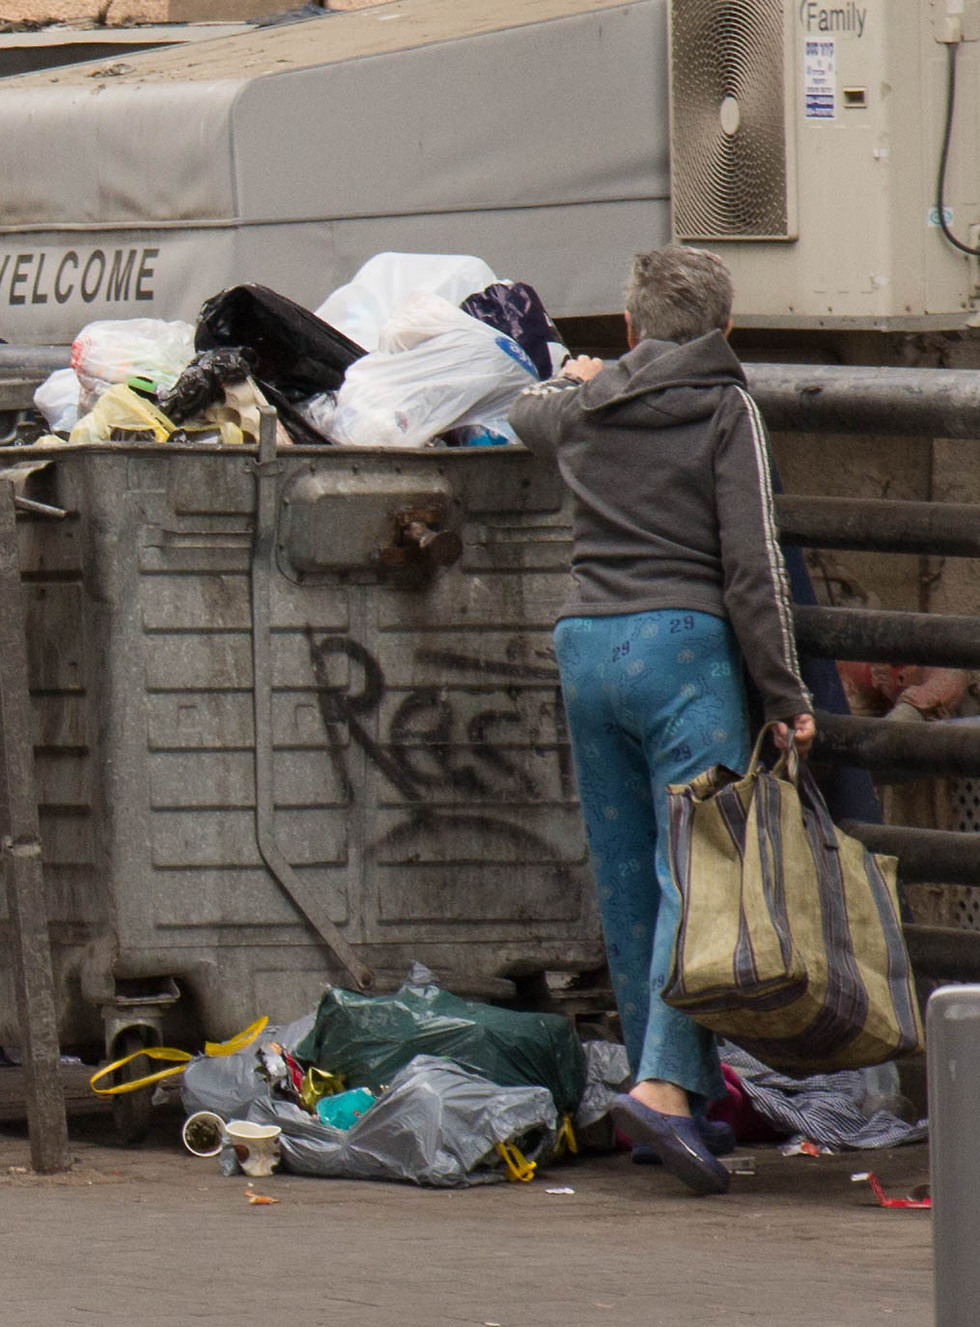 Homeless people go through garbage in search of food recyclable waste (Photo: Eran Granot)